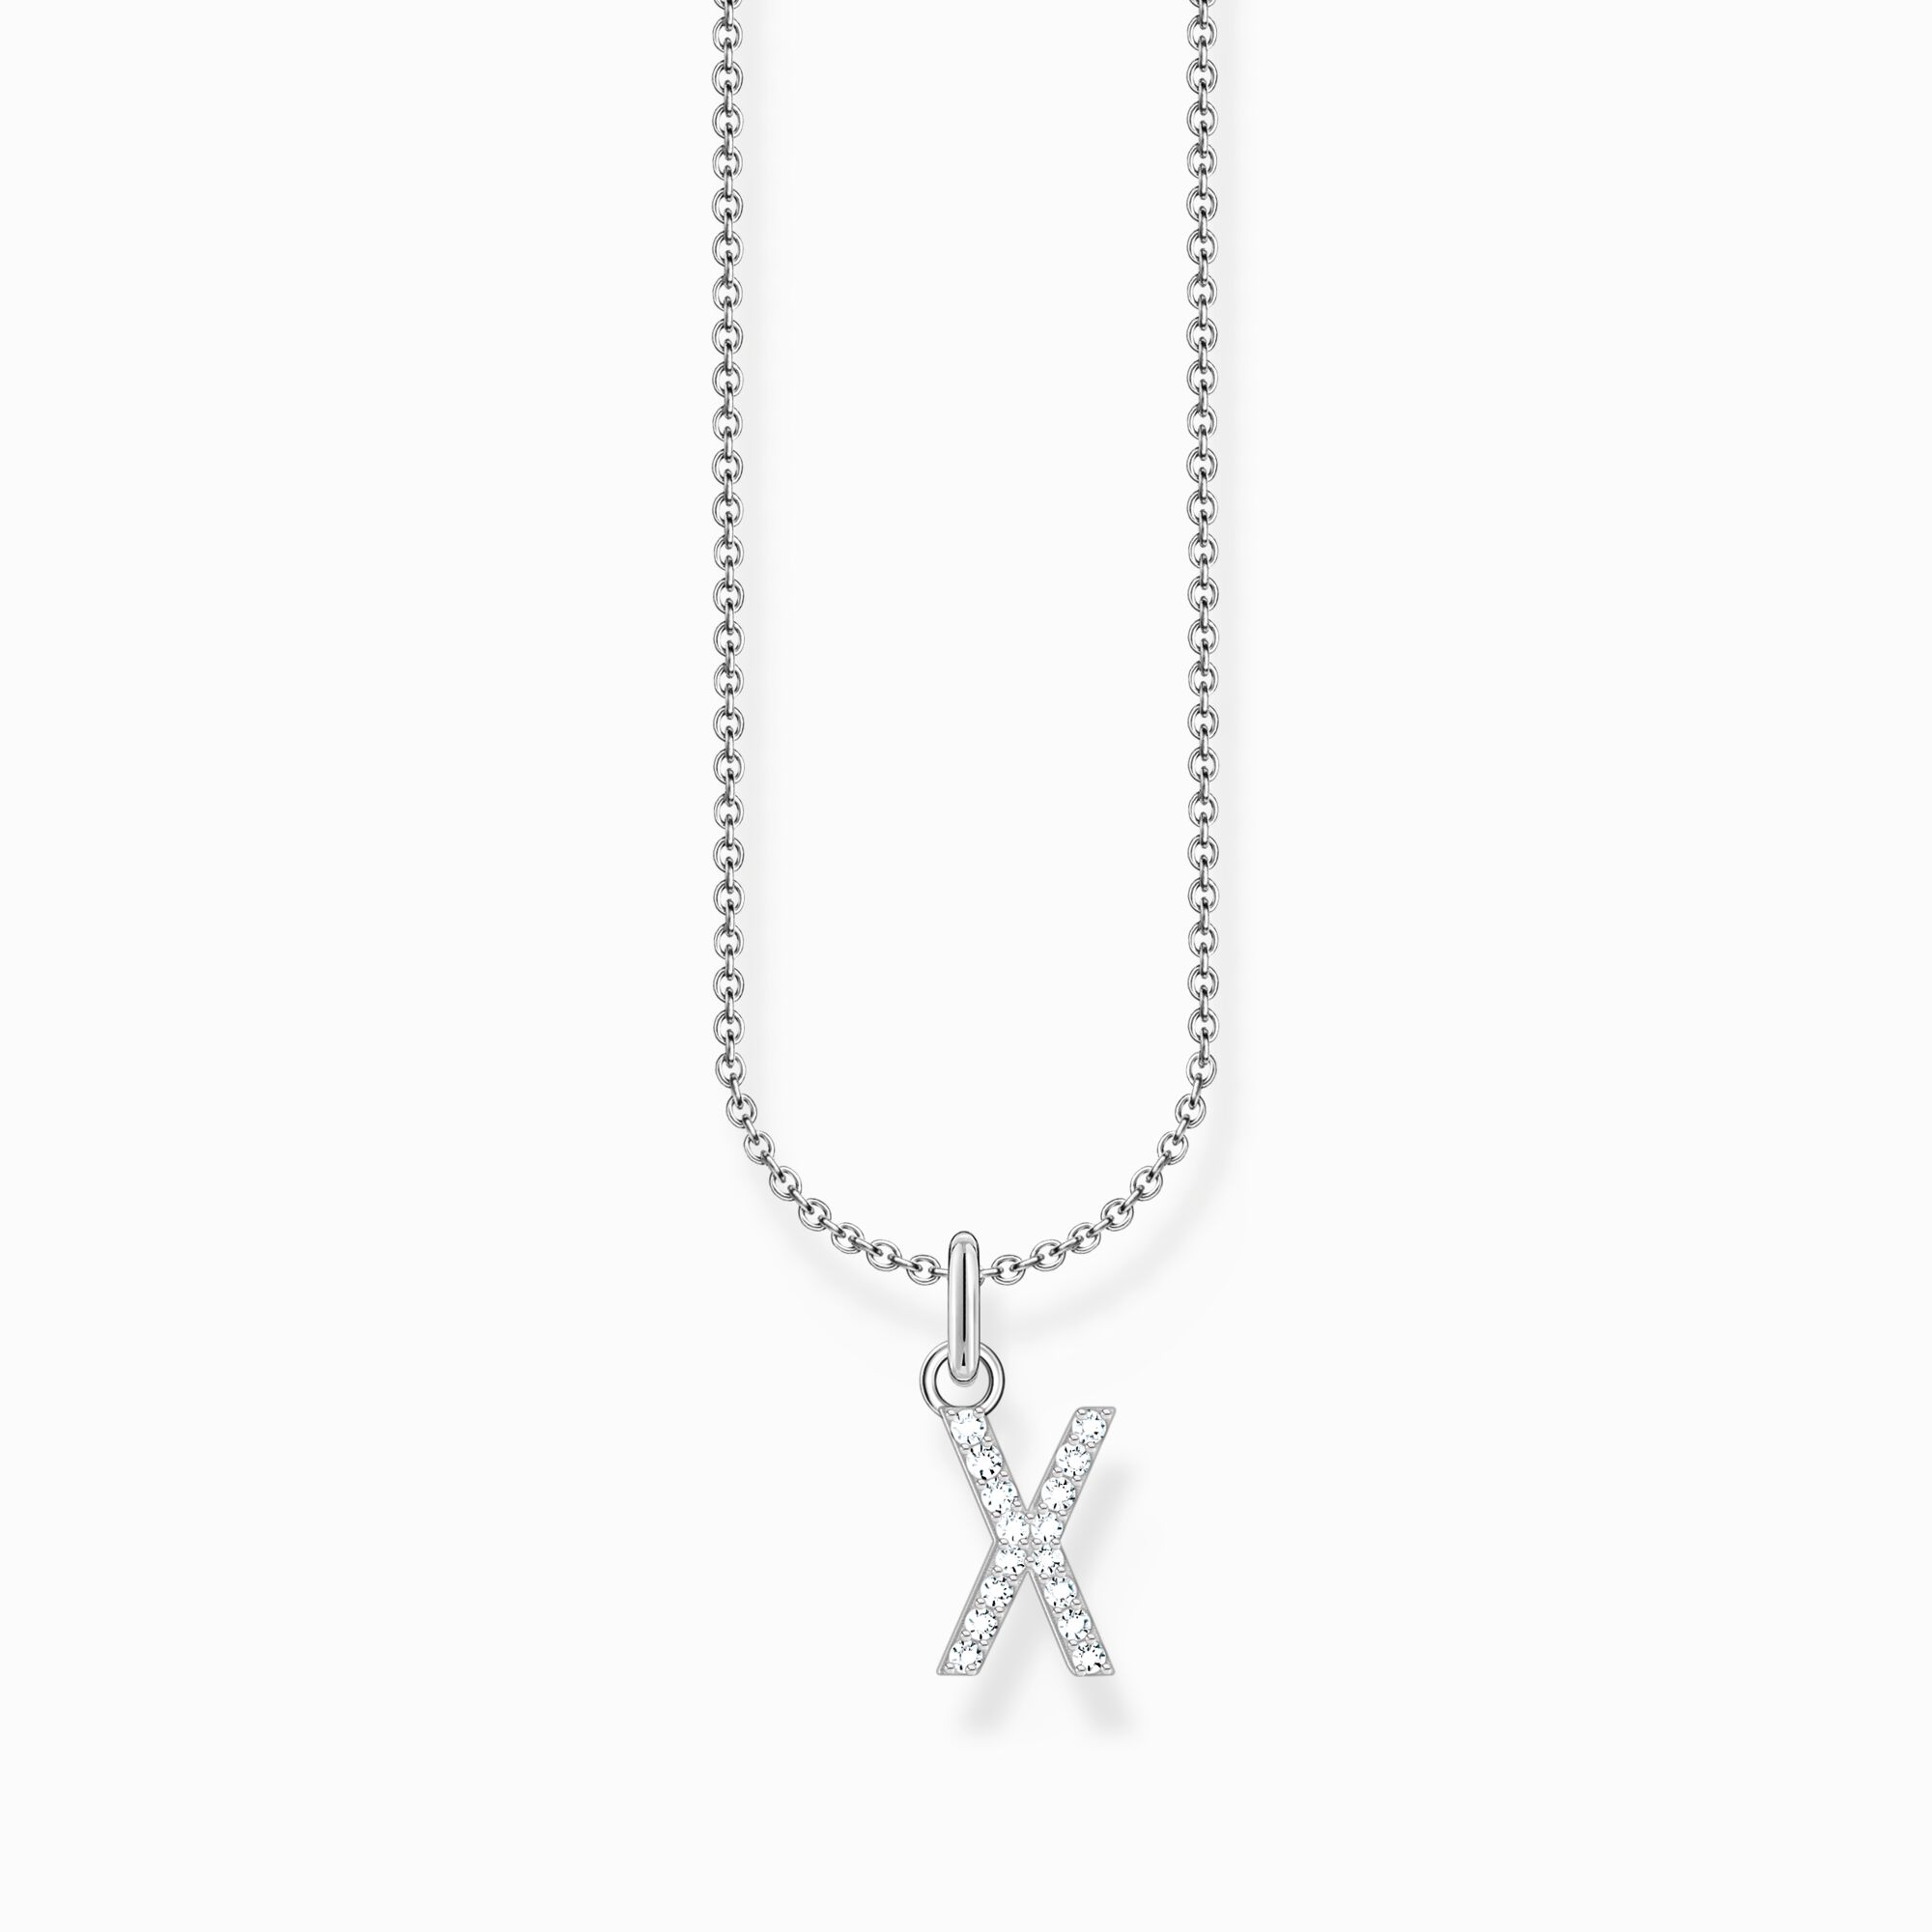 Silver necklace with letter pendant X and white zirconia from the Charming Collection collection in the THOMAS SABO online store